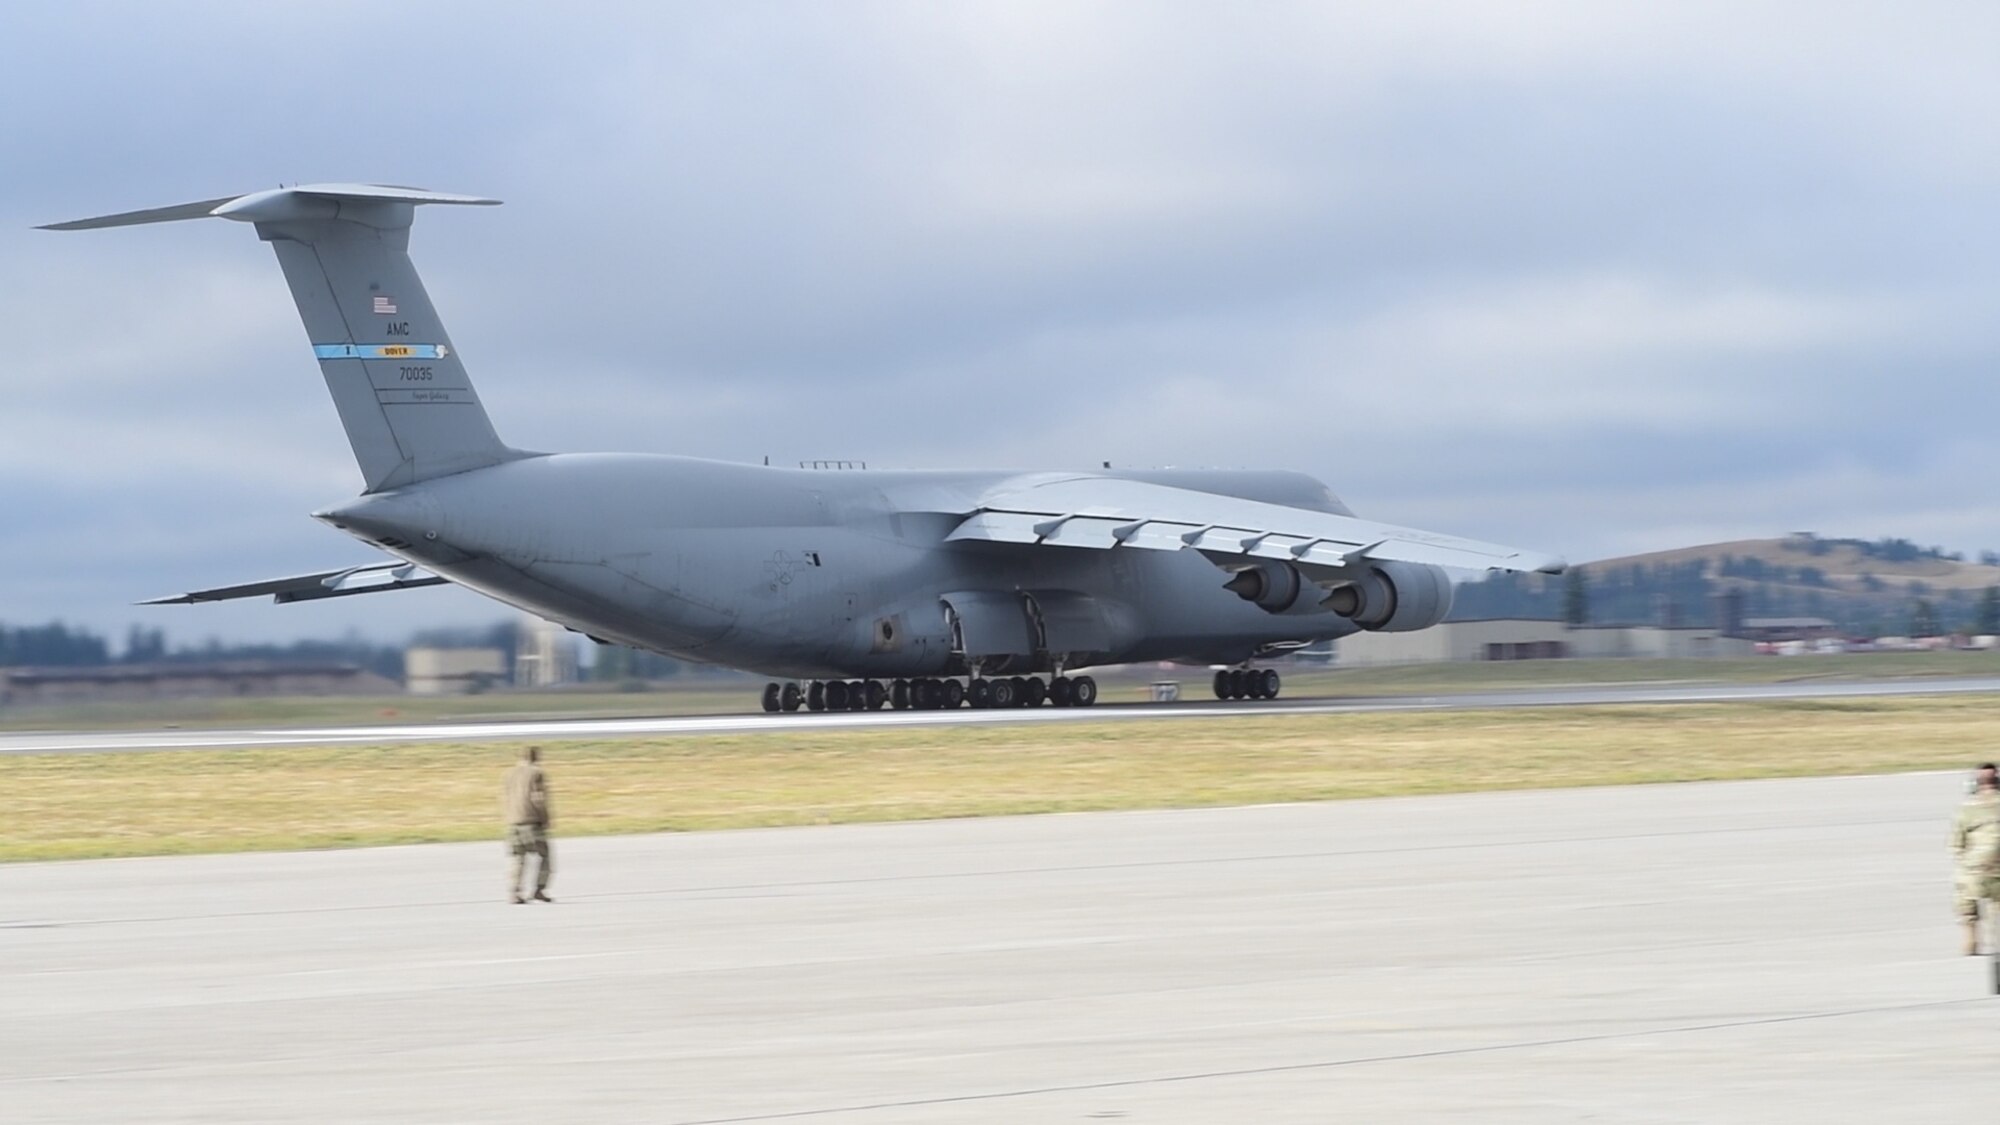 A C-5M Super Galaxy takes off from Fairchild Air Force Base, Wash., Sept. 23, 2019, in support of exercise Mobility Guardian 2019. Exercise Mobility Guardian is Air Mobility Command's premier large-scale mobility exercise. Through robust and relevant training, Mobility Guardian improves the readiness and capabilities of Mobility Airmen to deliver rapid global mobility and builds a more lethal and ready Air Force. (U.S. Air Force photo by Tech. Sgt. Esteban Esquivel).